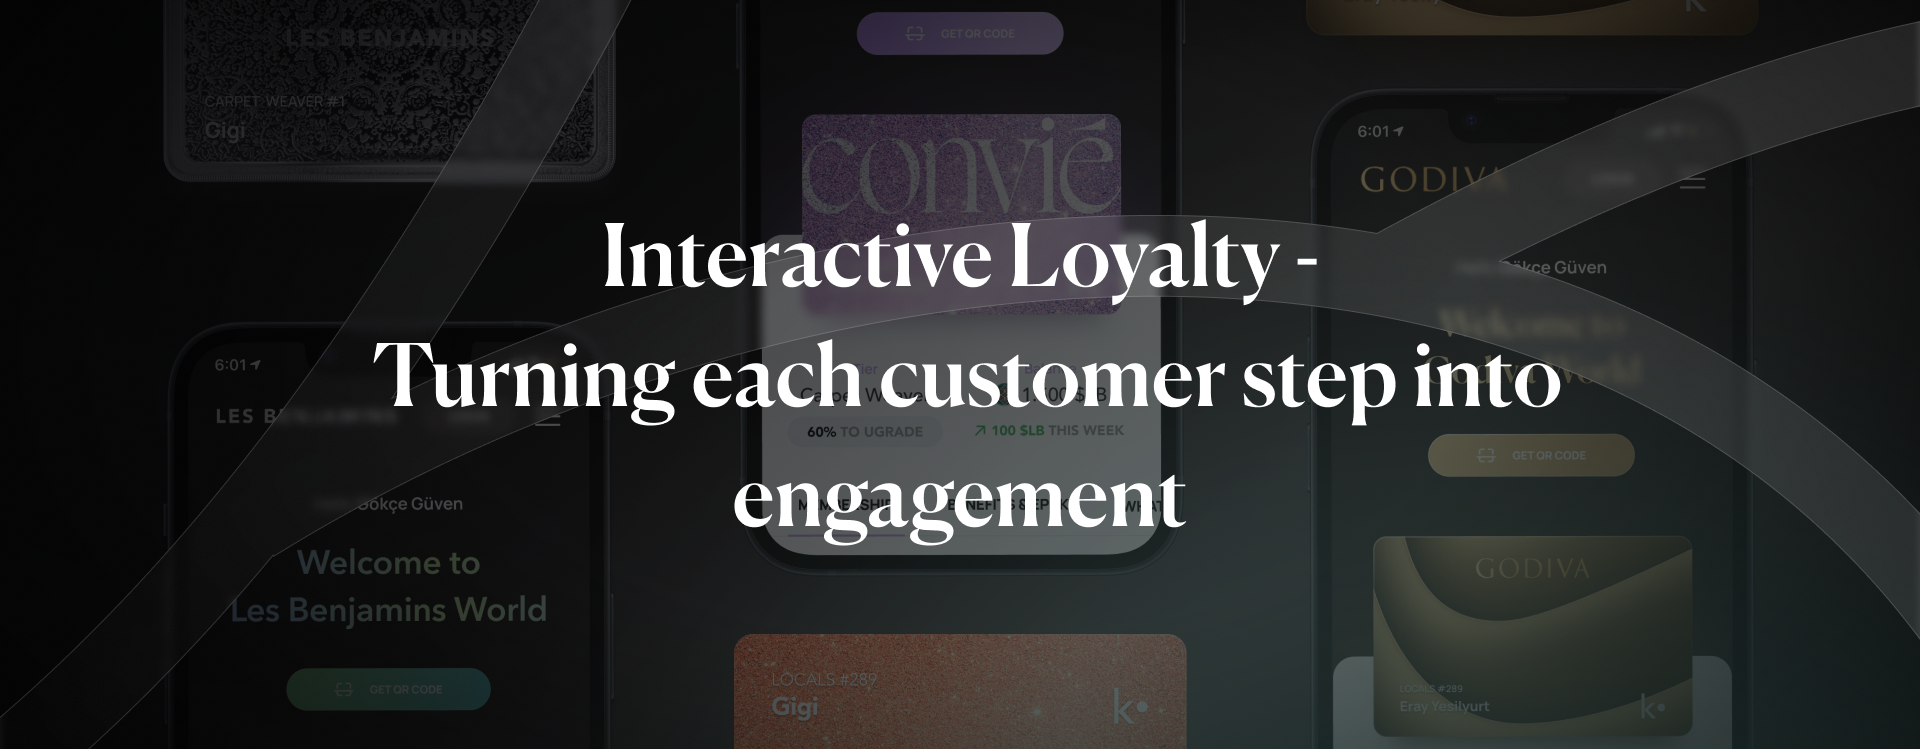 What happened this week with Next-Gen Loyalty? 🚀